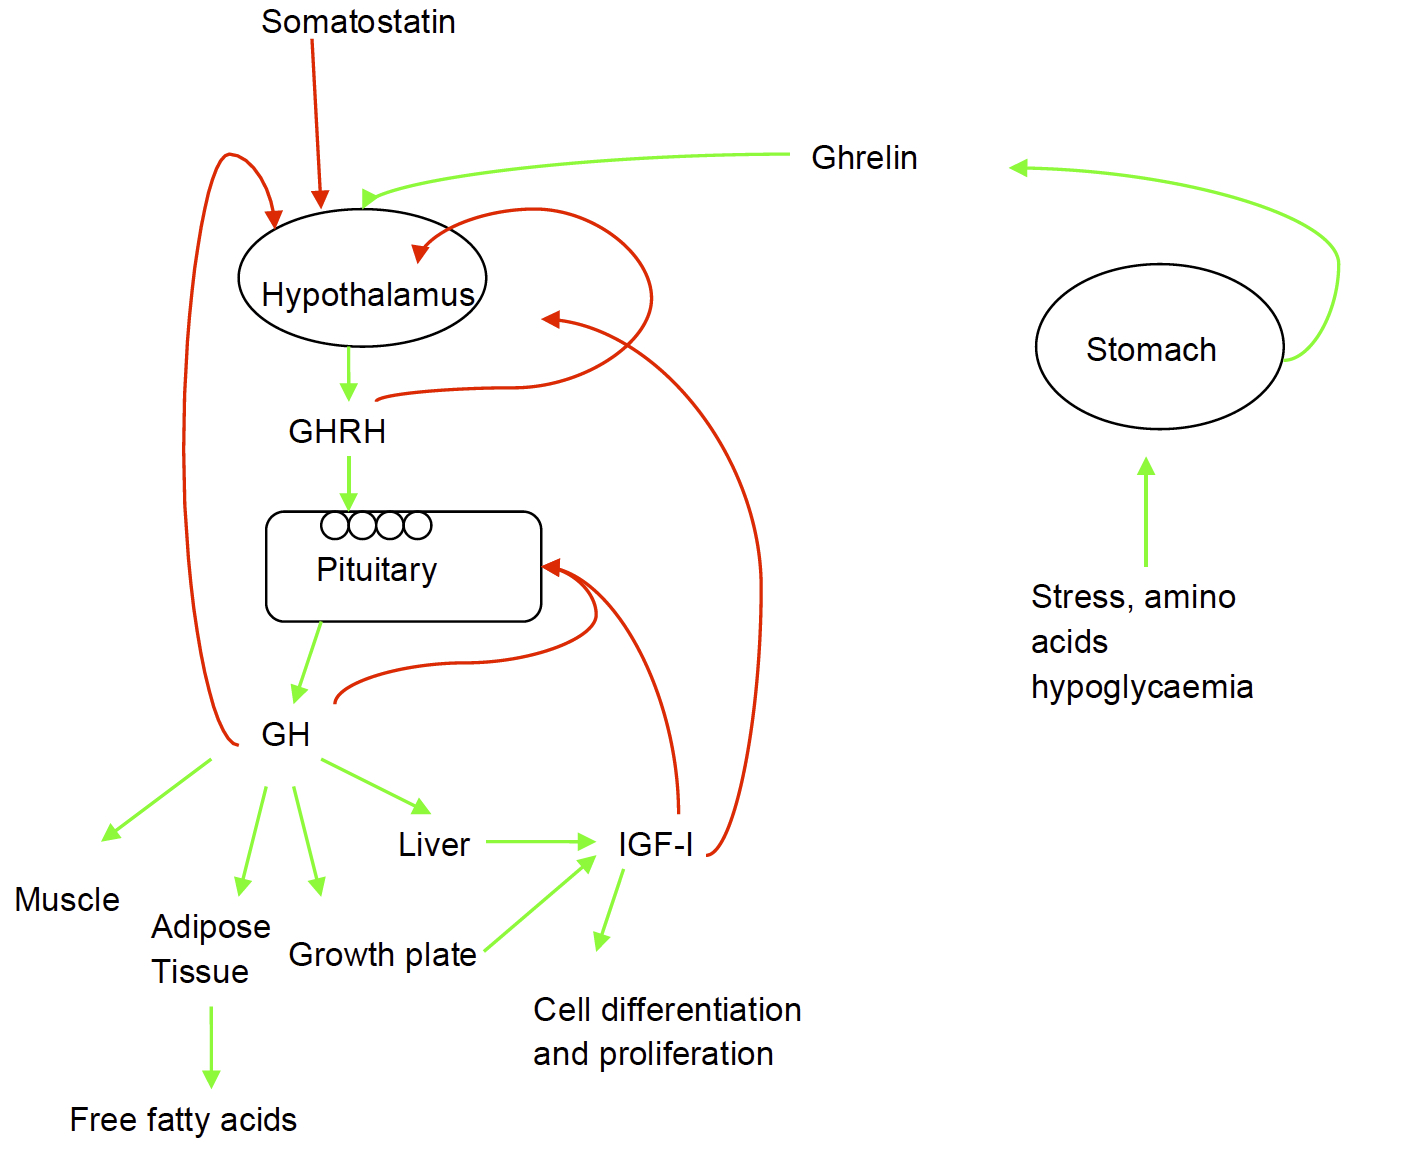 Figure 1 Physiology of the GH-IGF-I Axis. Release of GHRH from the hypothalamus is under the control of somatostatin (inhibitory) and Ghrelin (stimulatory). Alterations in GHRH tone lead to pulsatile release of GH from the anterior pituitary. GH has widespread effects on muscle, fat and in the growth plate. IGF-I is produced in liver and in local tissues in response to GH stimulation. Red lines indicate feedback loops.